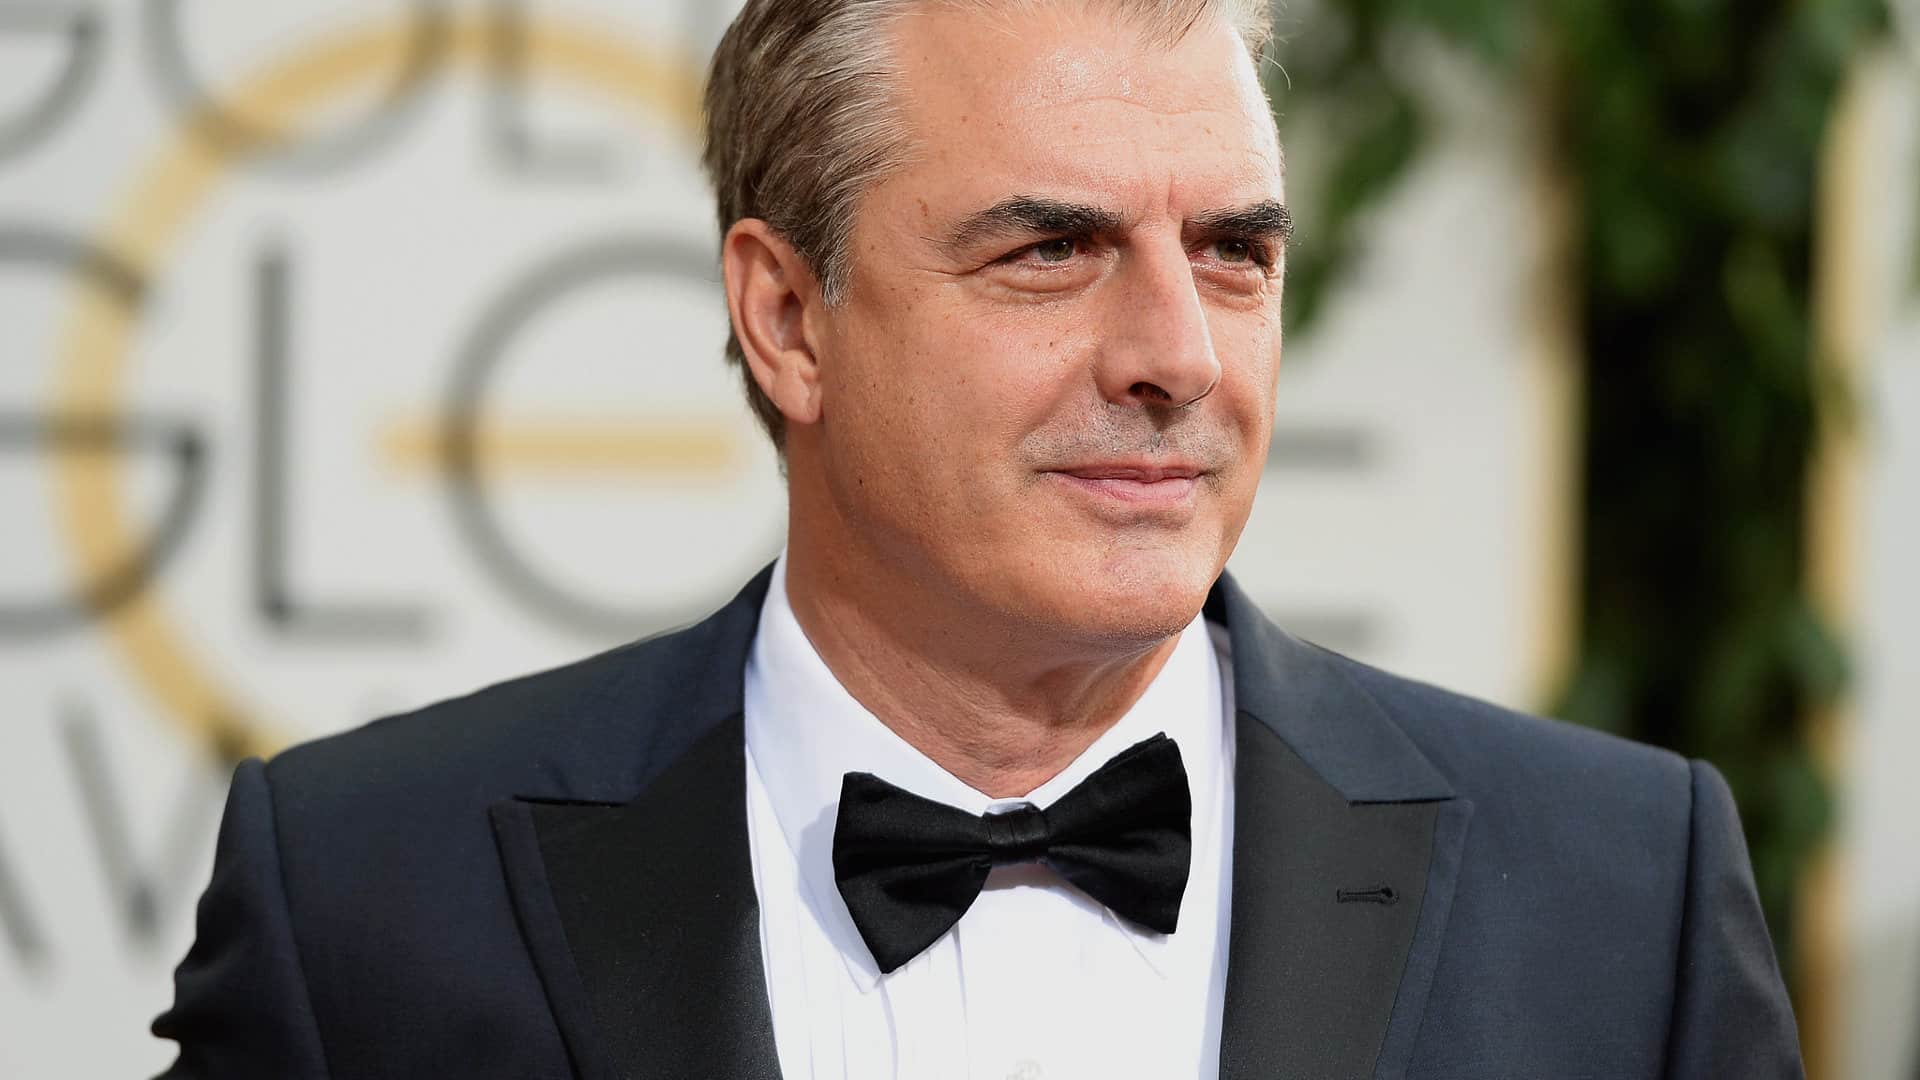 Chris Noth Le Serie Tv Da Sex And The City A Gone